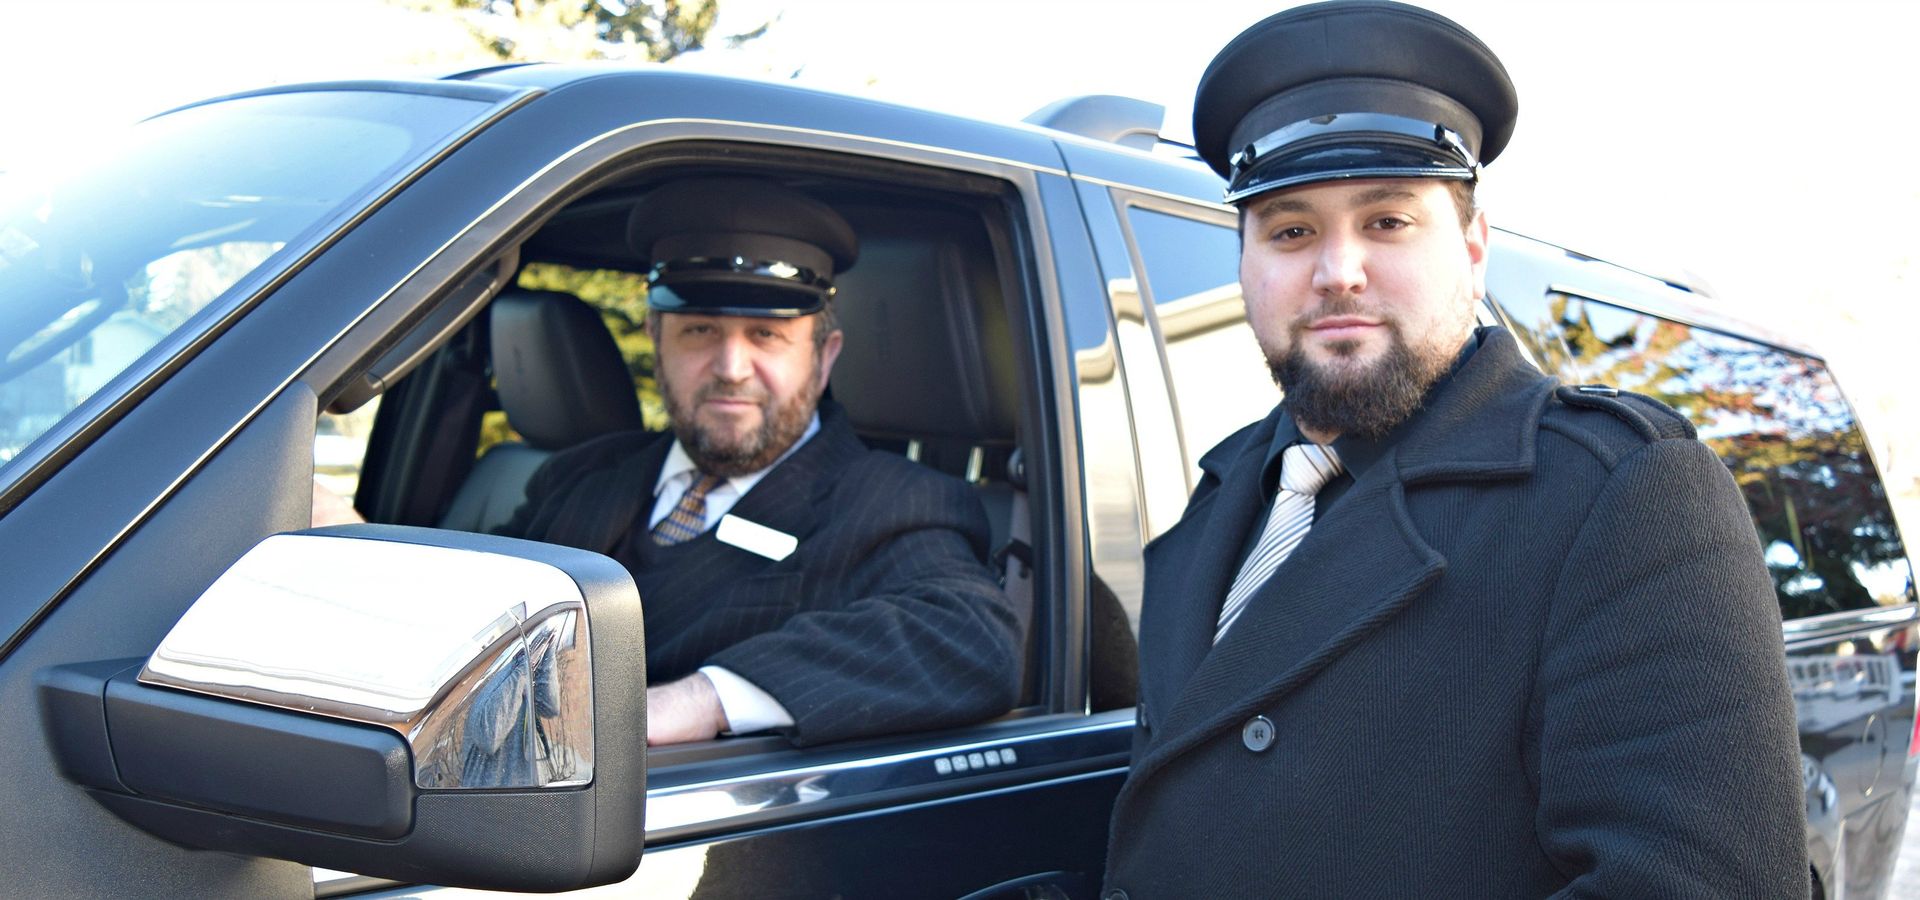 Professional chauffeurs with hats